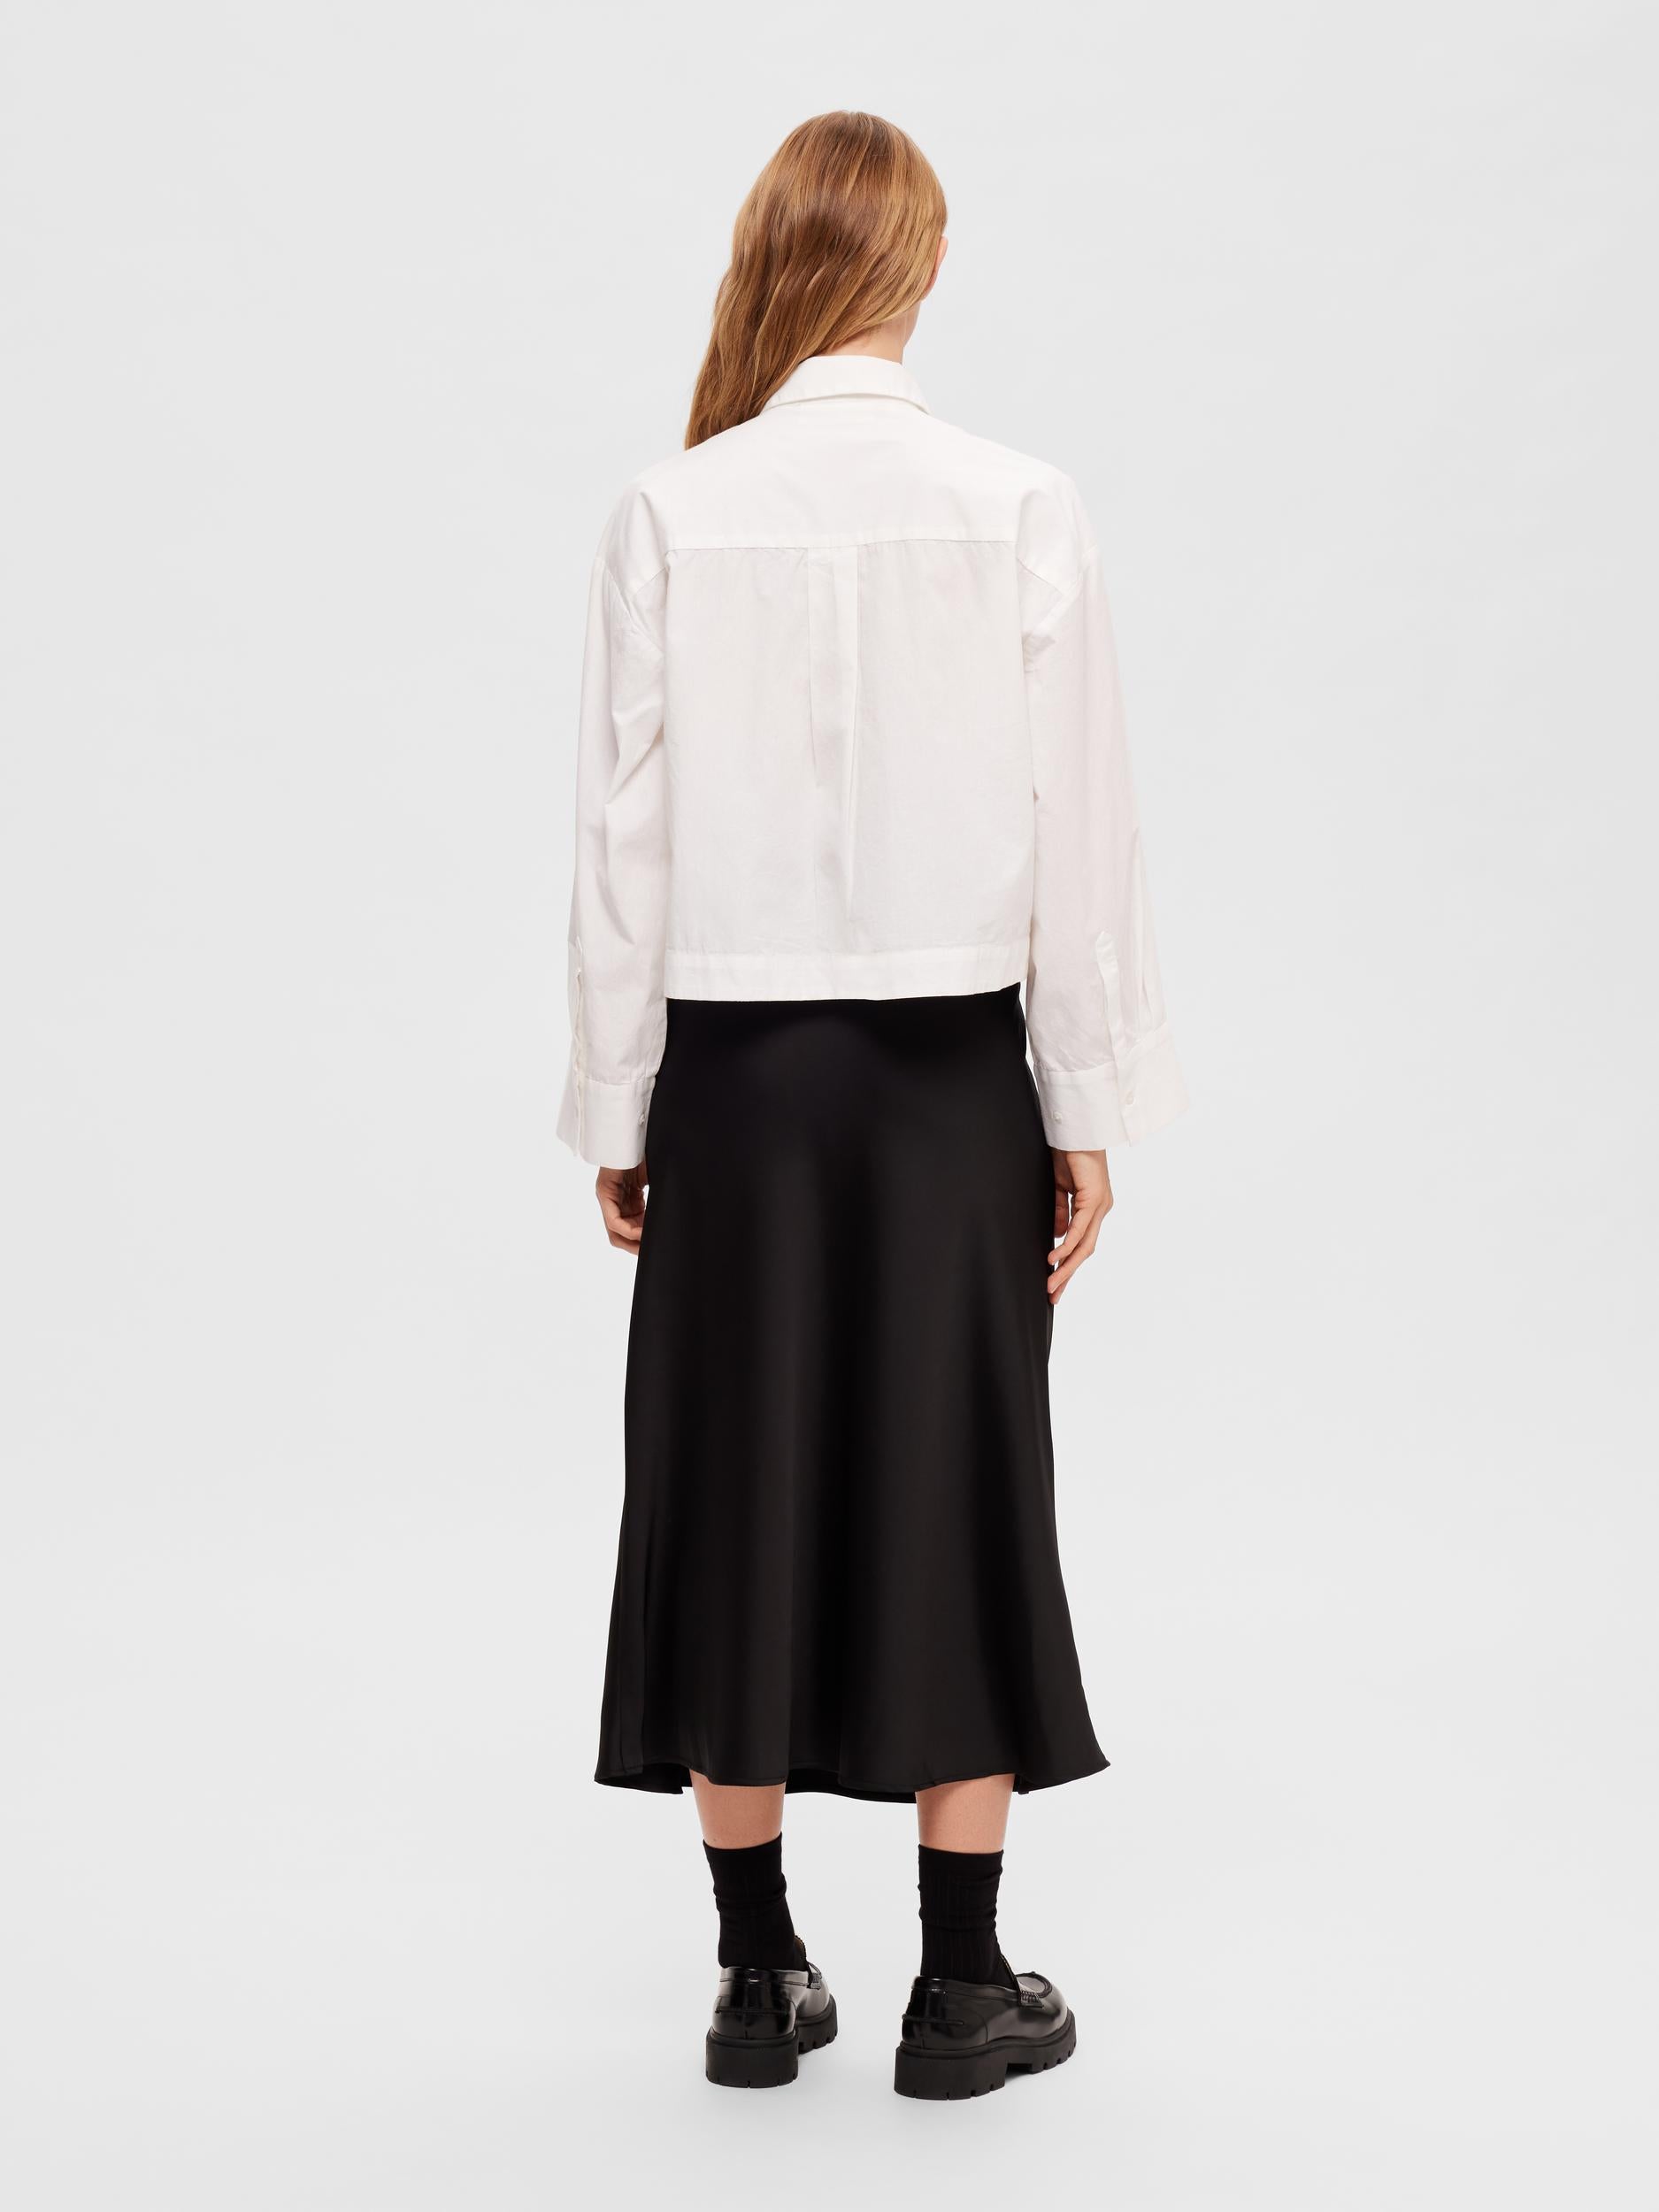 Selected Femme "Astha" Cropped Boxy Shirt